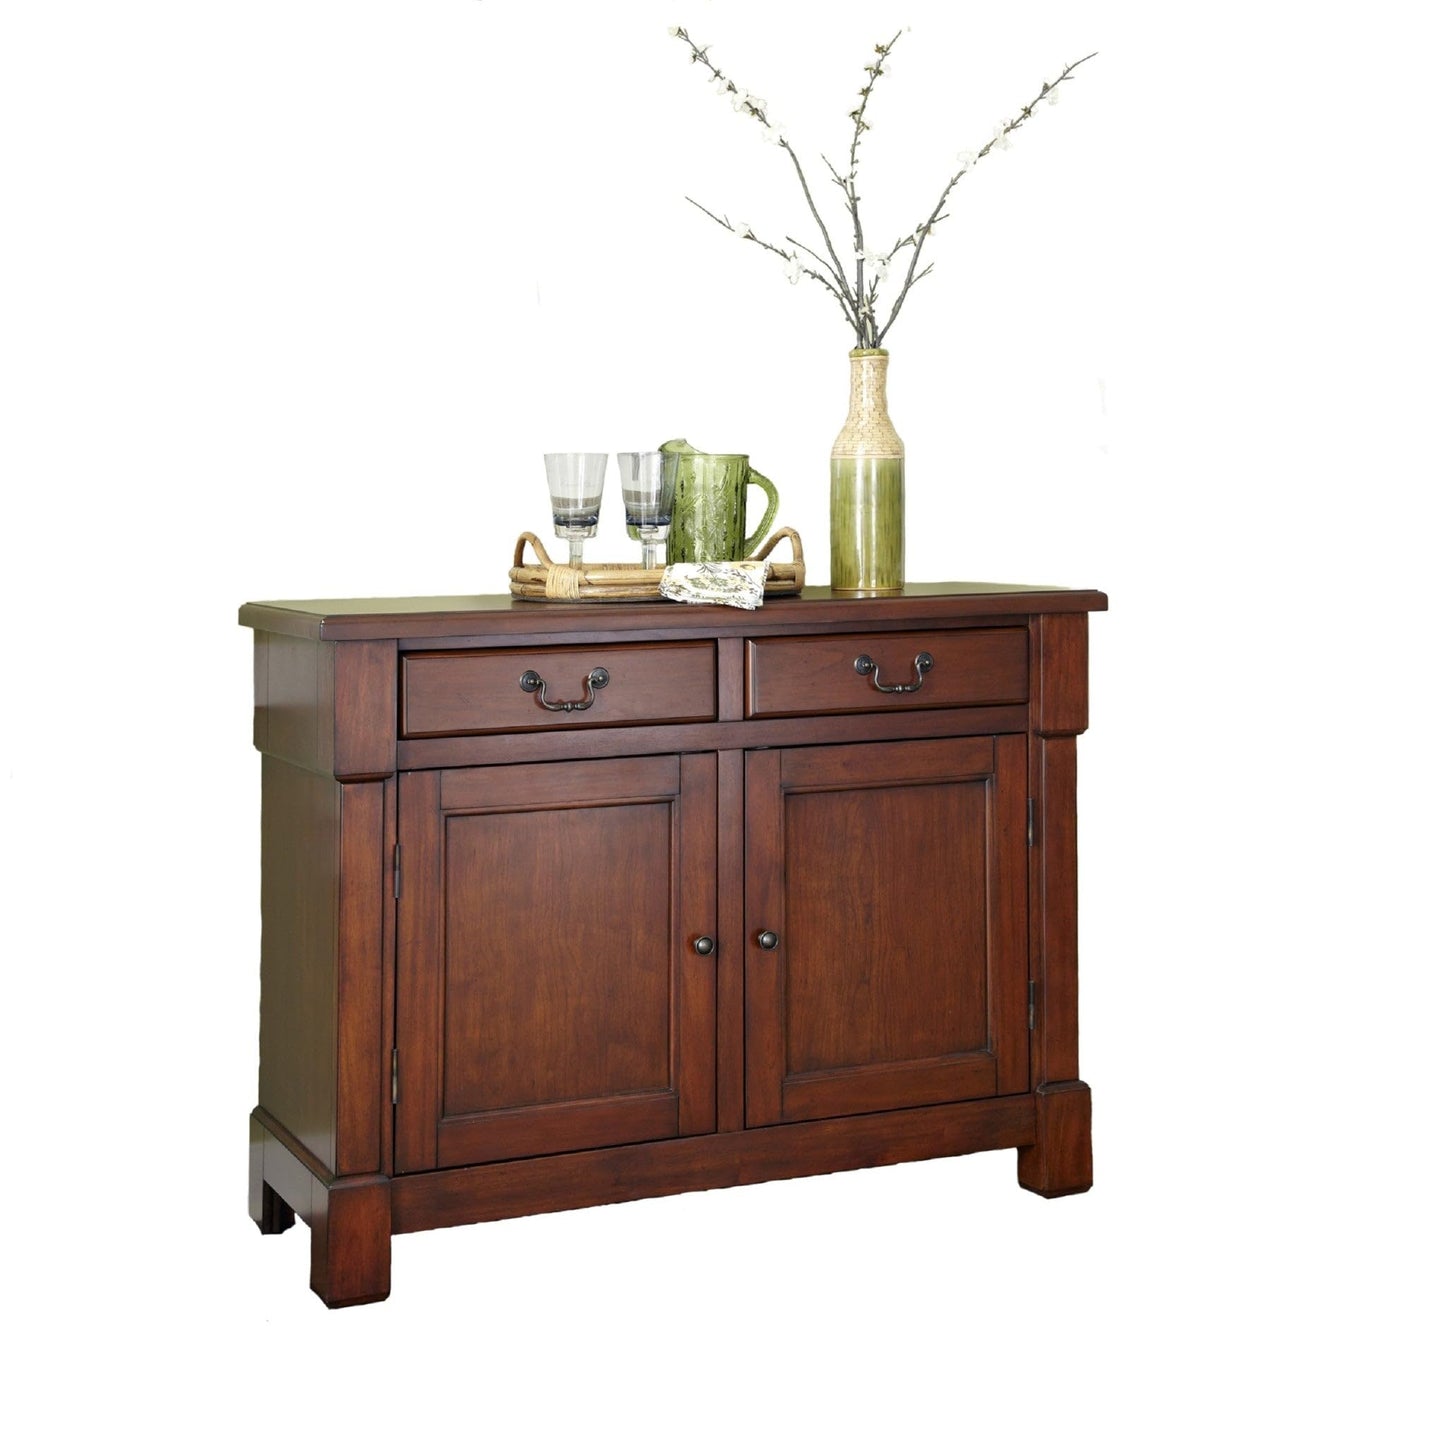 Homestyles Aspen Buffet with Storage and Felt Lined Drawers, 48 Inches Wide by 36 Inches High, Rustic Cherry